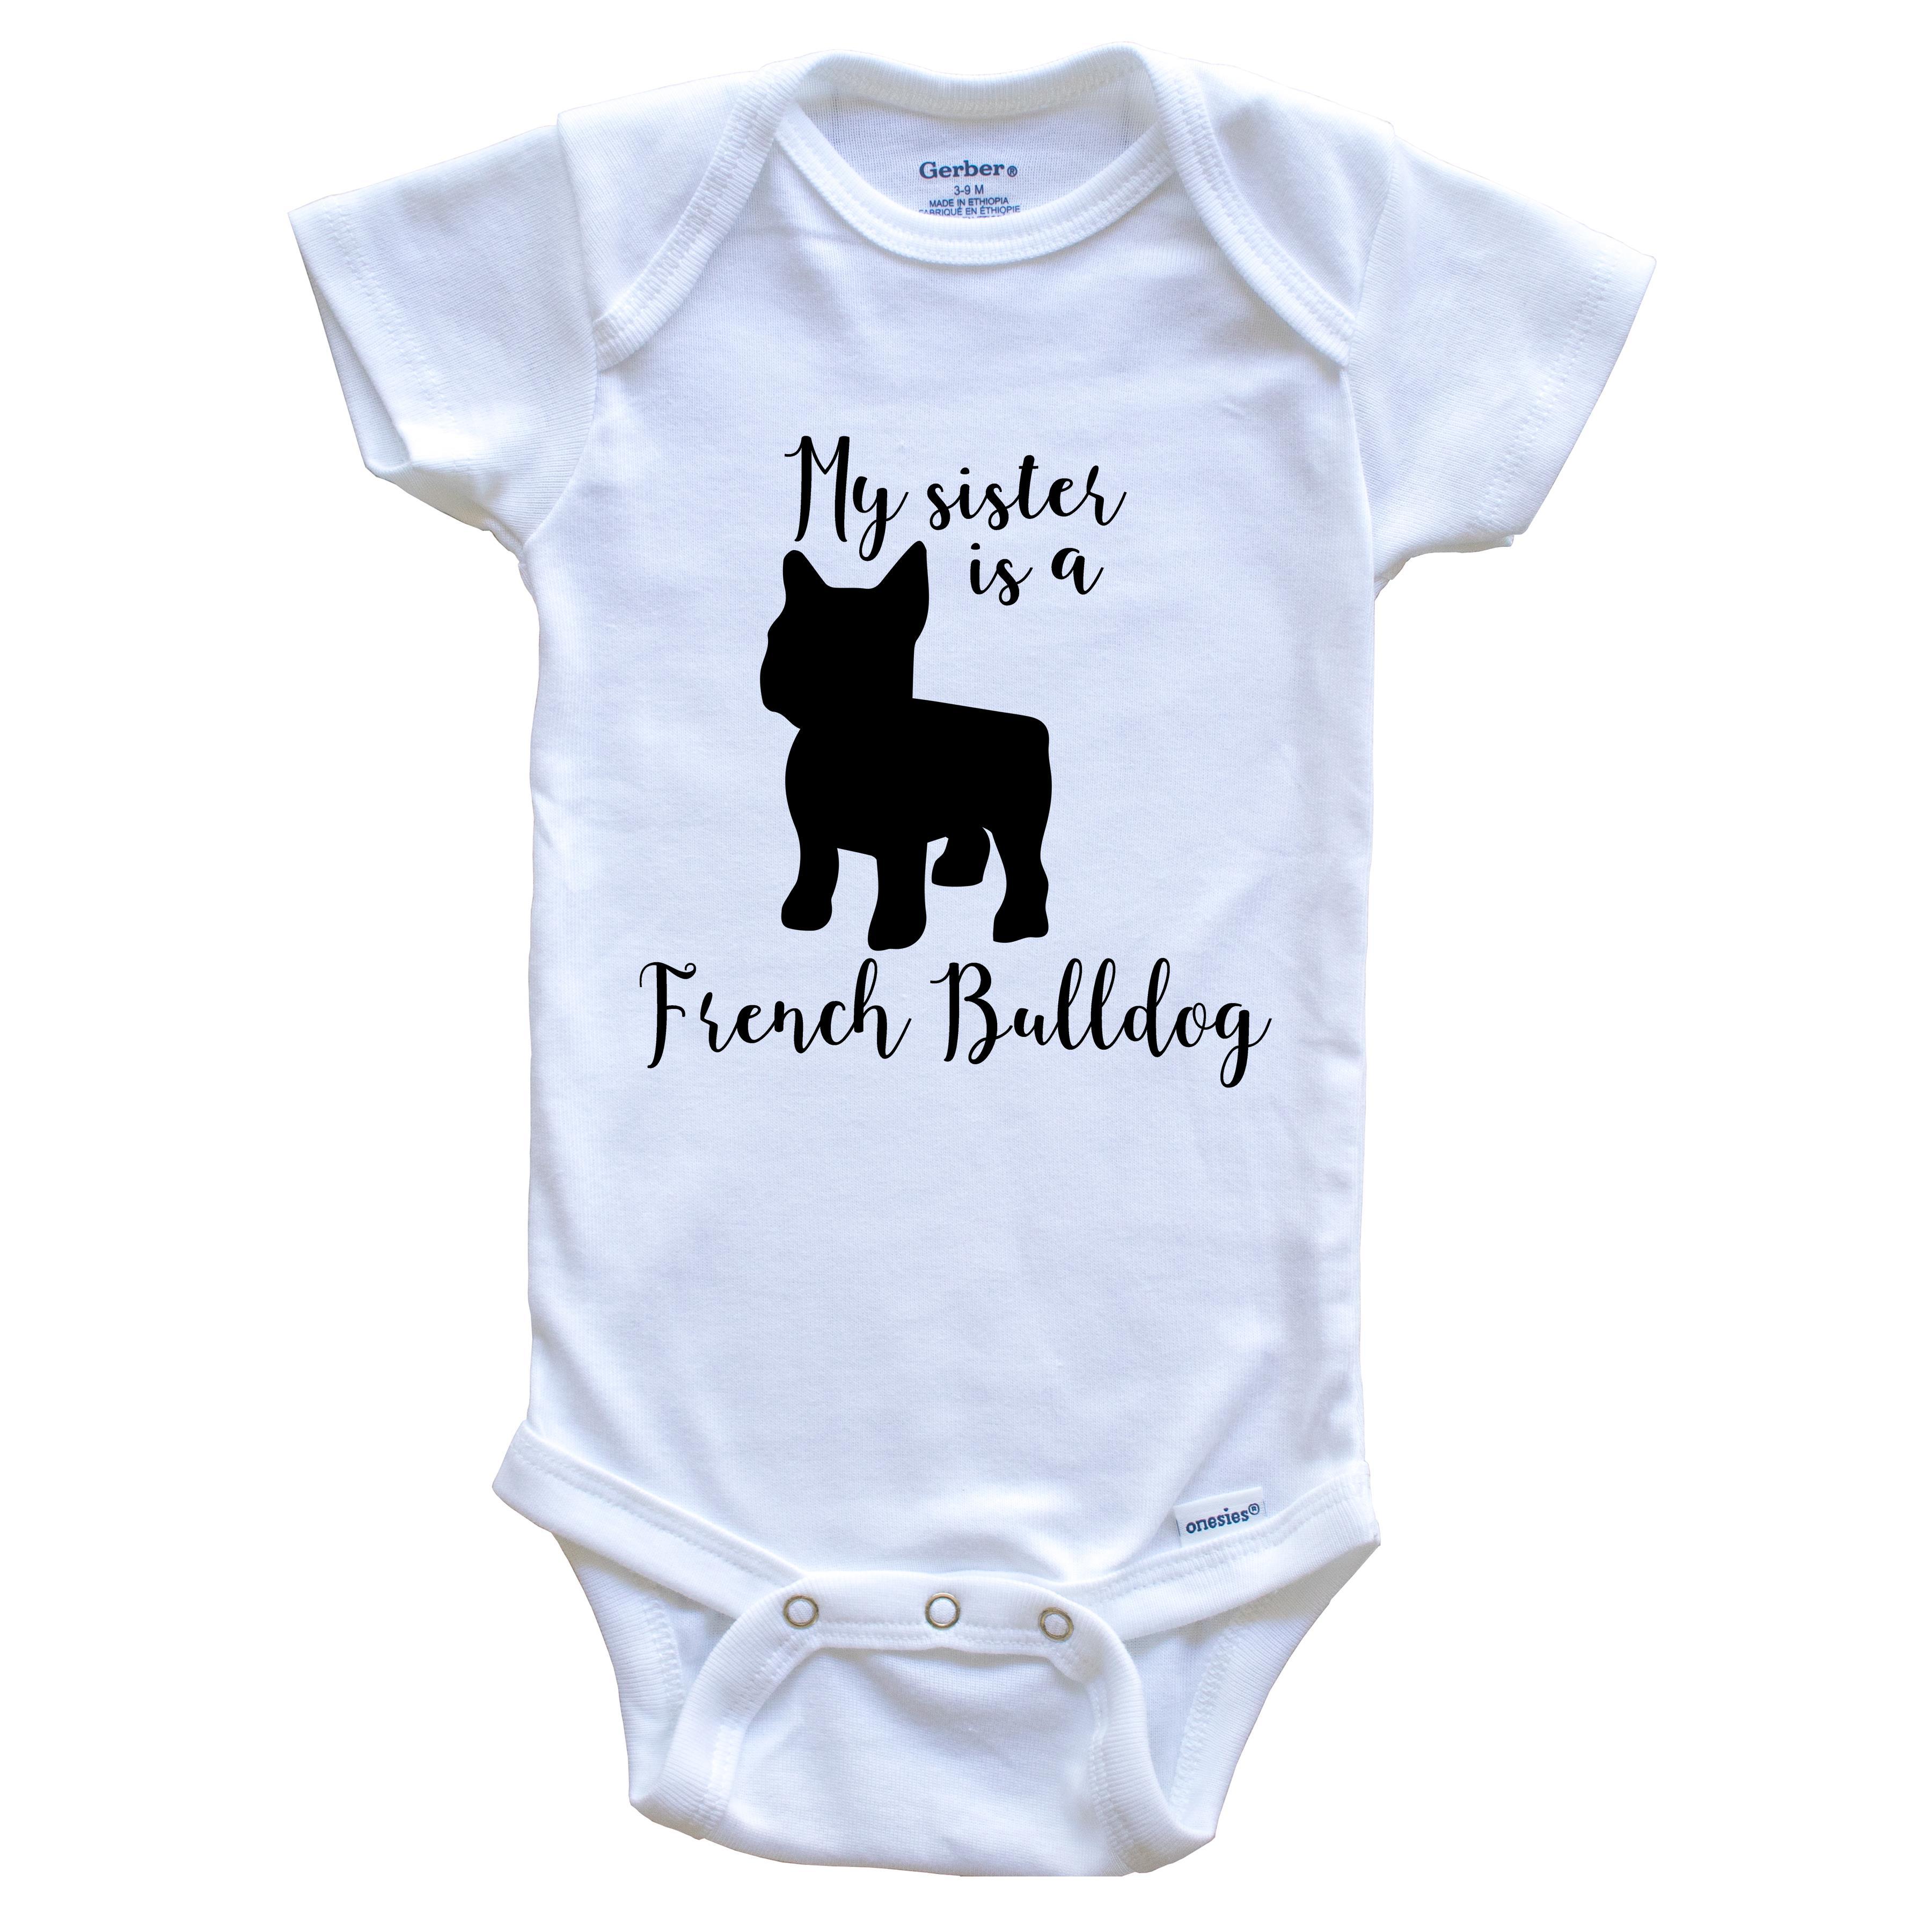 My sister is a Frenchie  Bulldog onesie